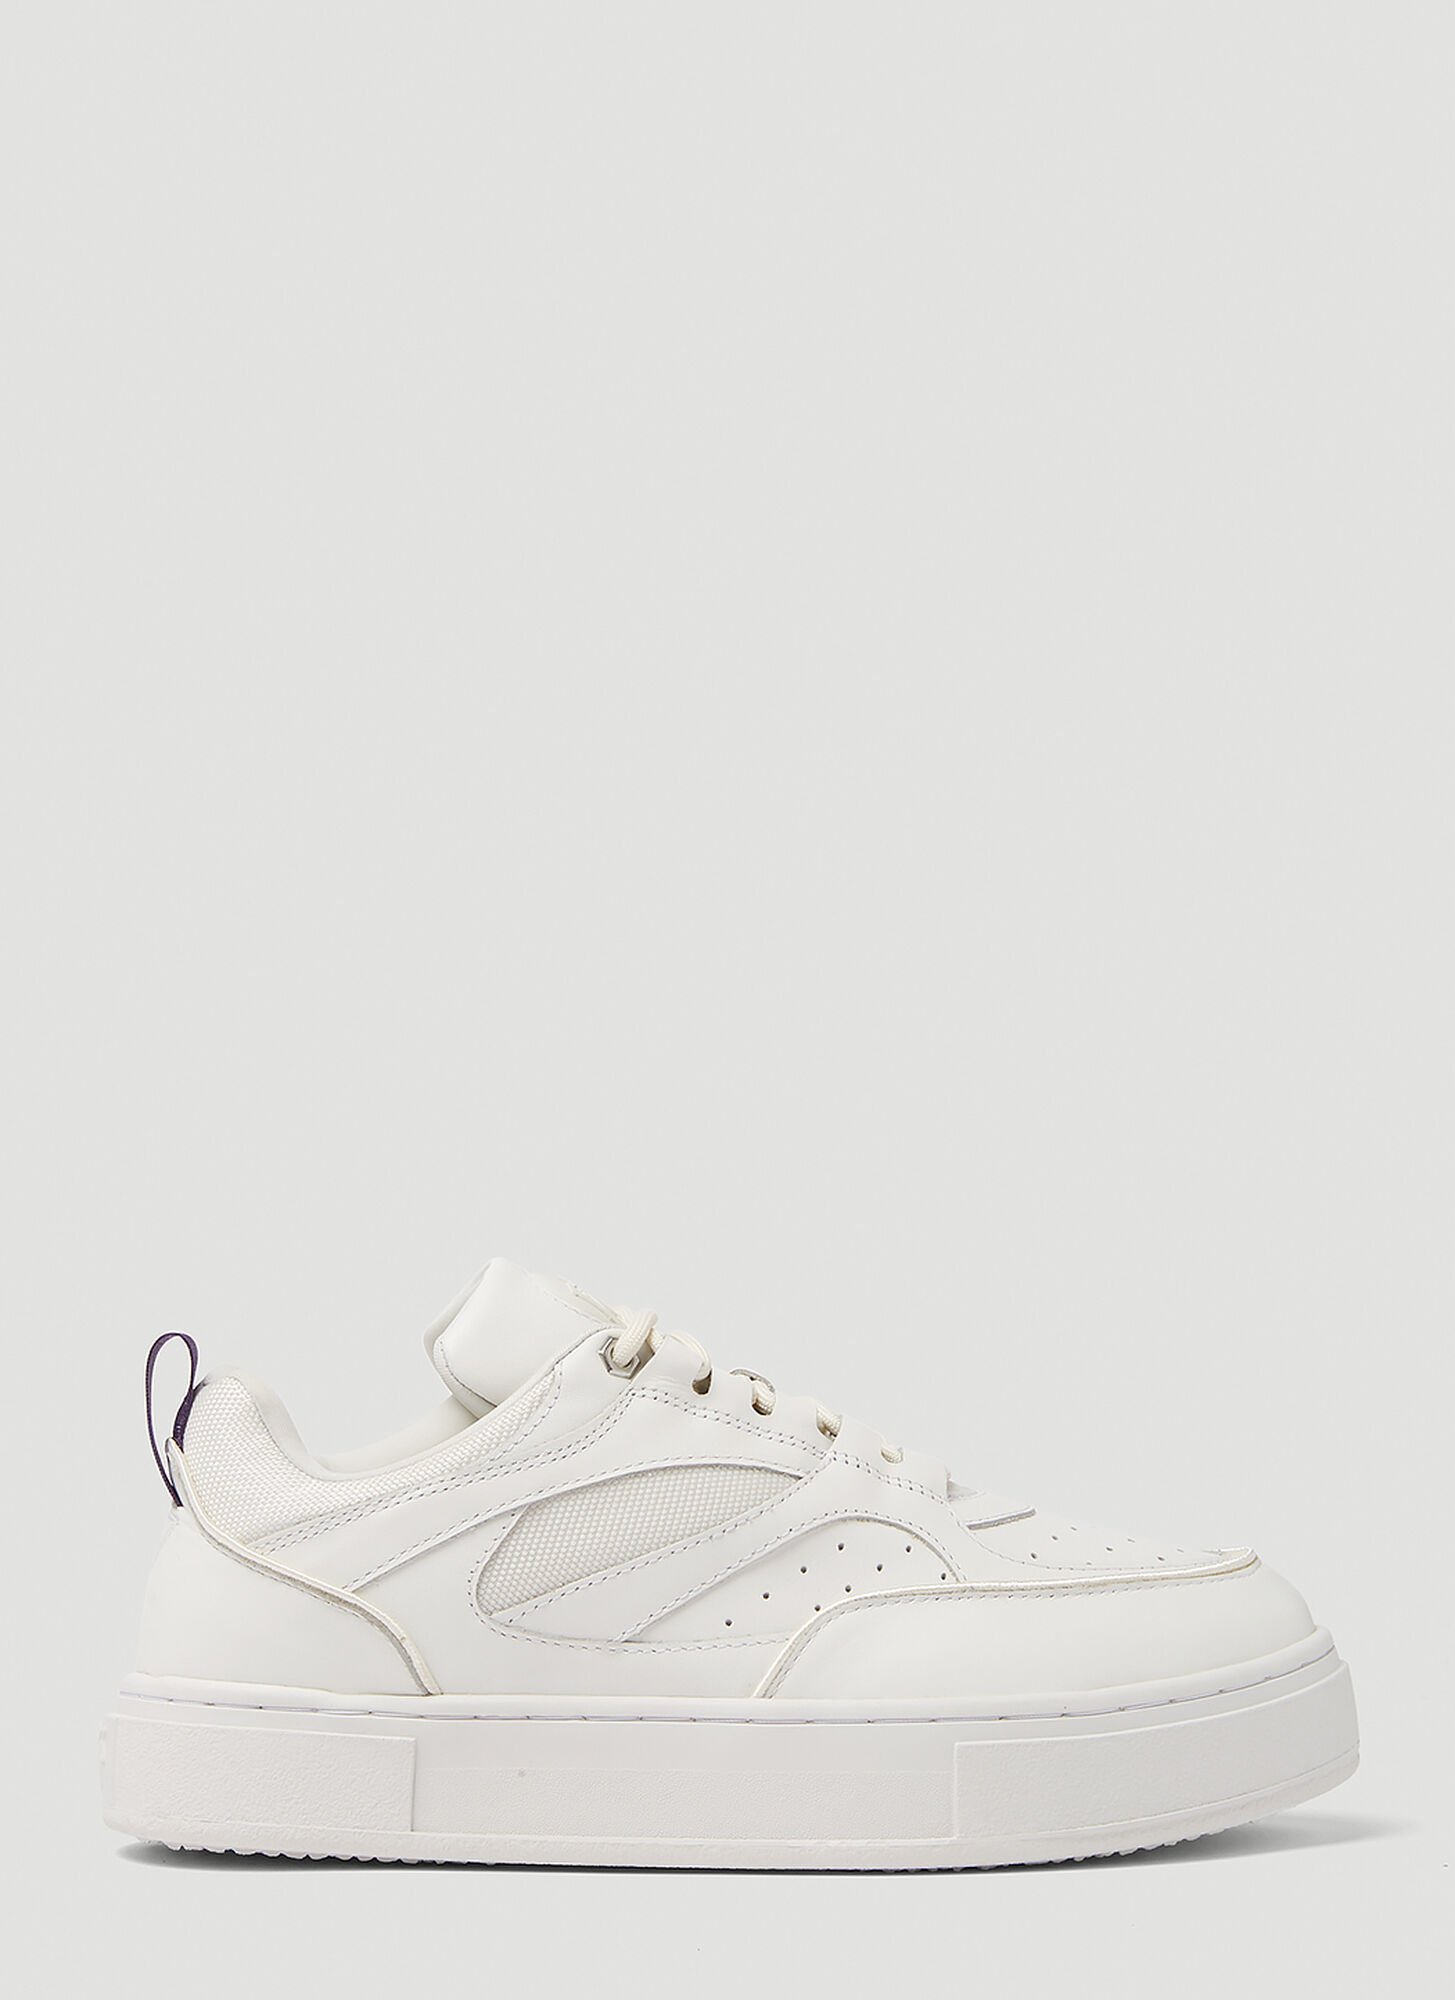 Eytys Sidney Low-top Sneakers Unisex White